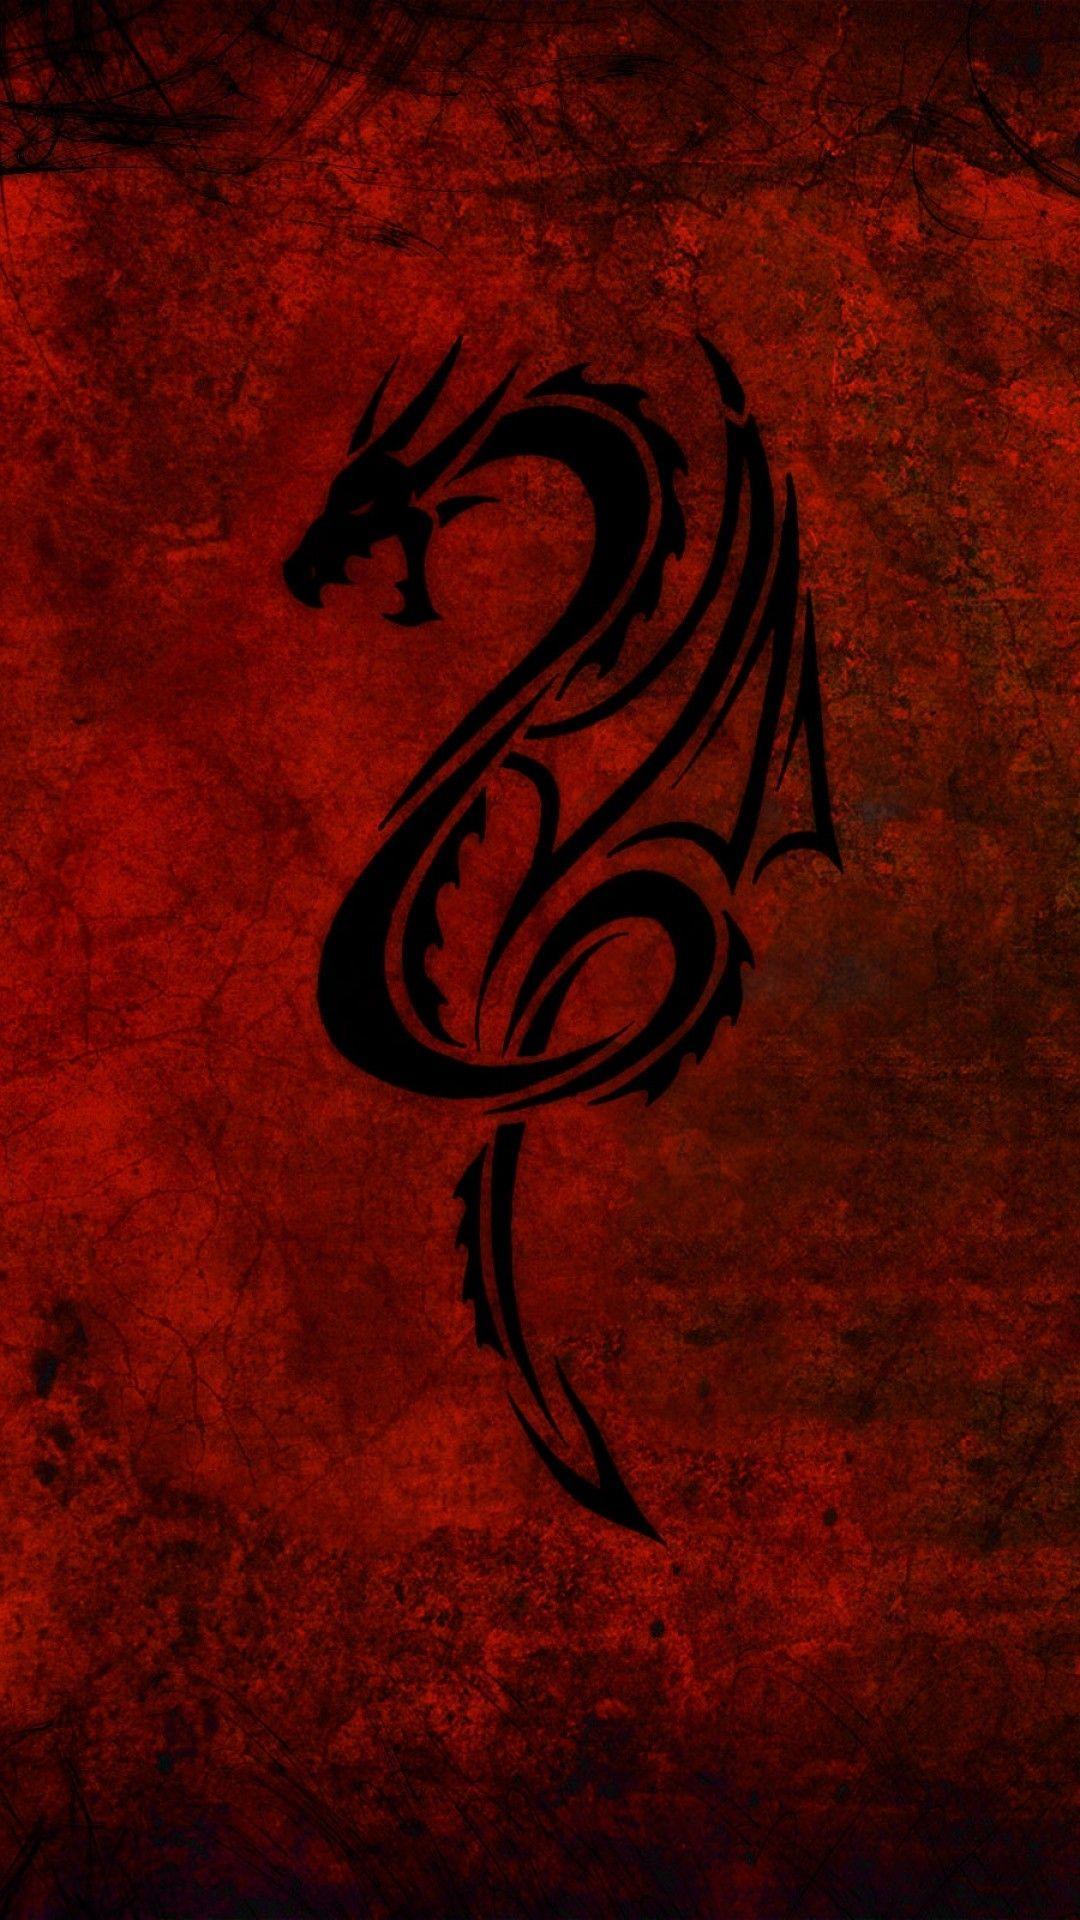 fire dragon wallpapers for iphone